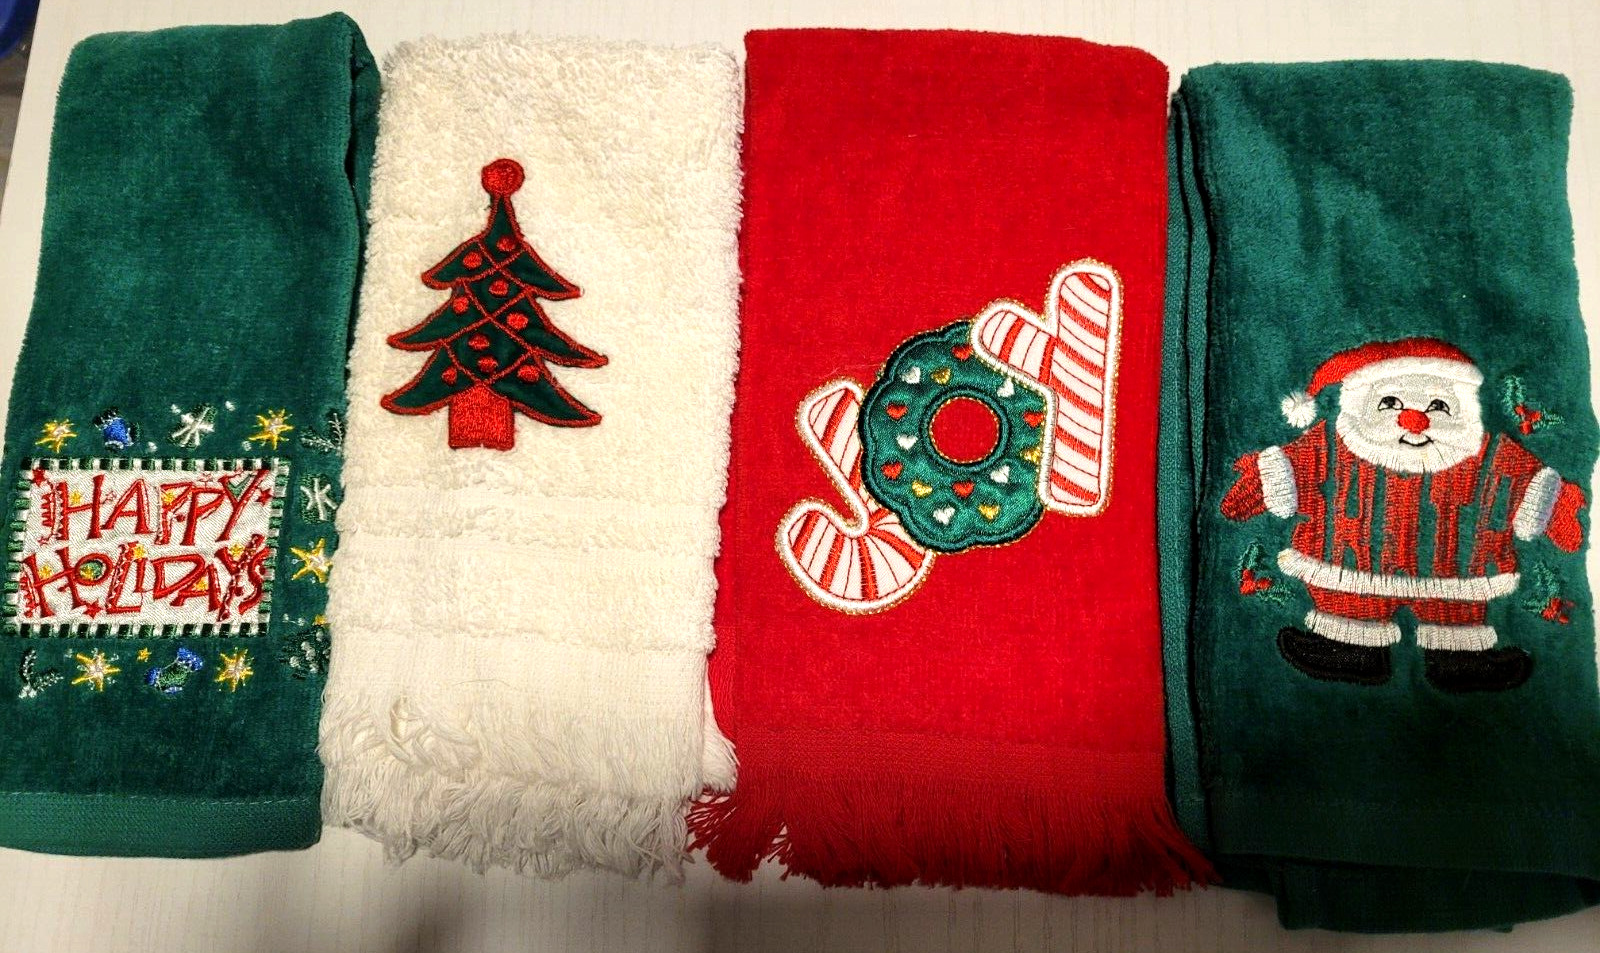 Lot of 4 Vintage Christmas Kitchen Hand Towels Cotton Green White Red EUC Decor